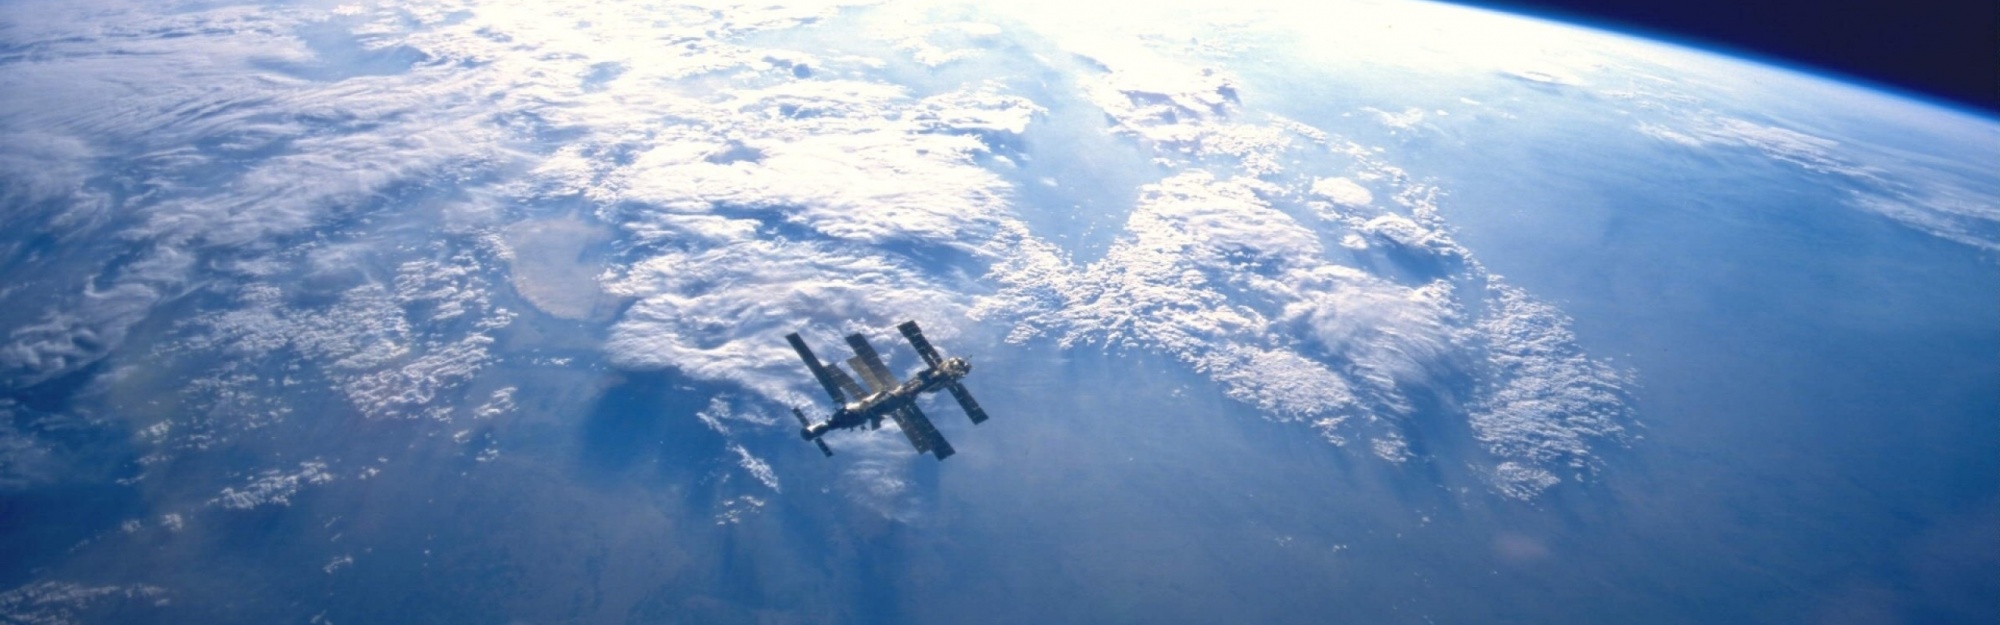 Earth And Space Station Mir